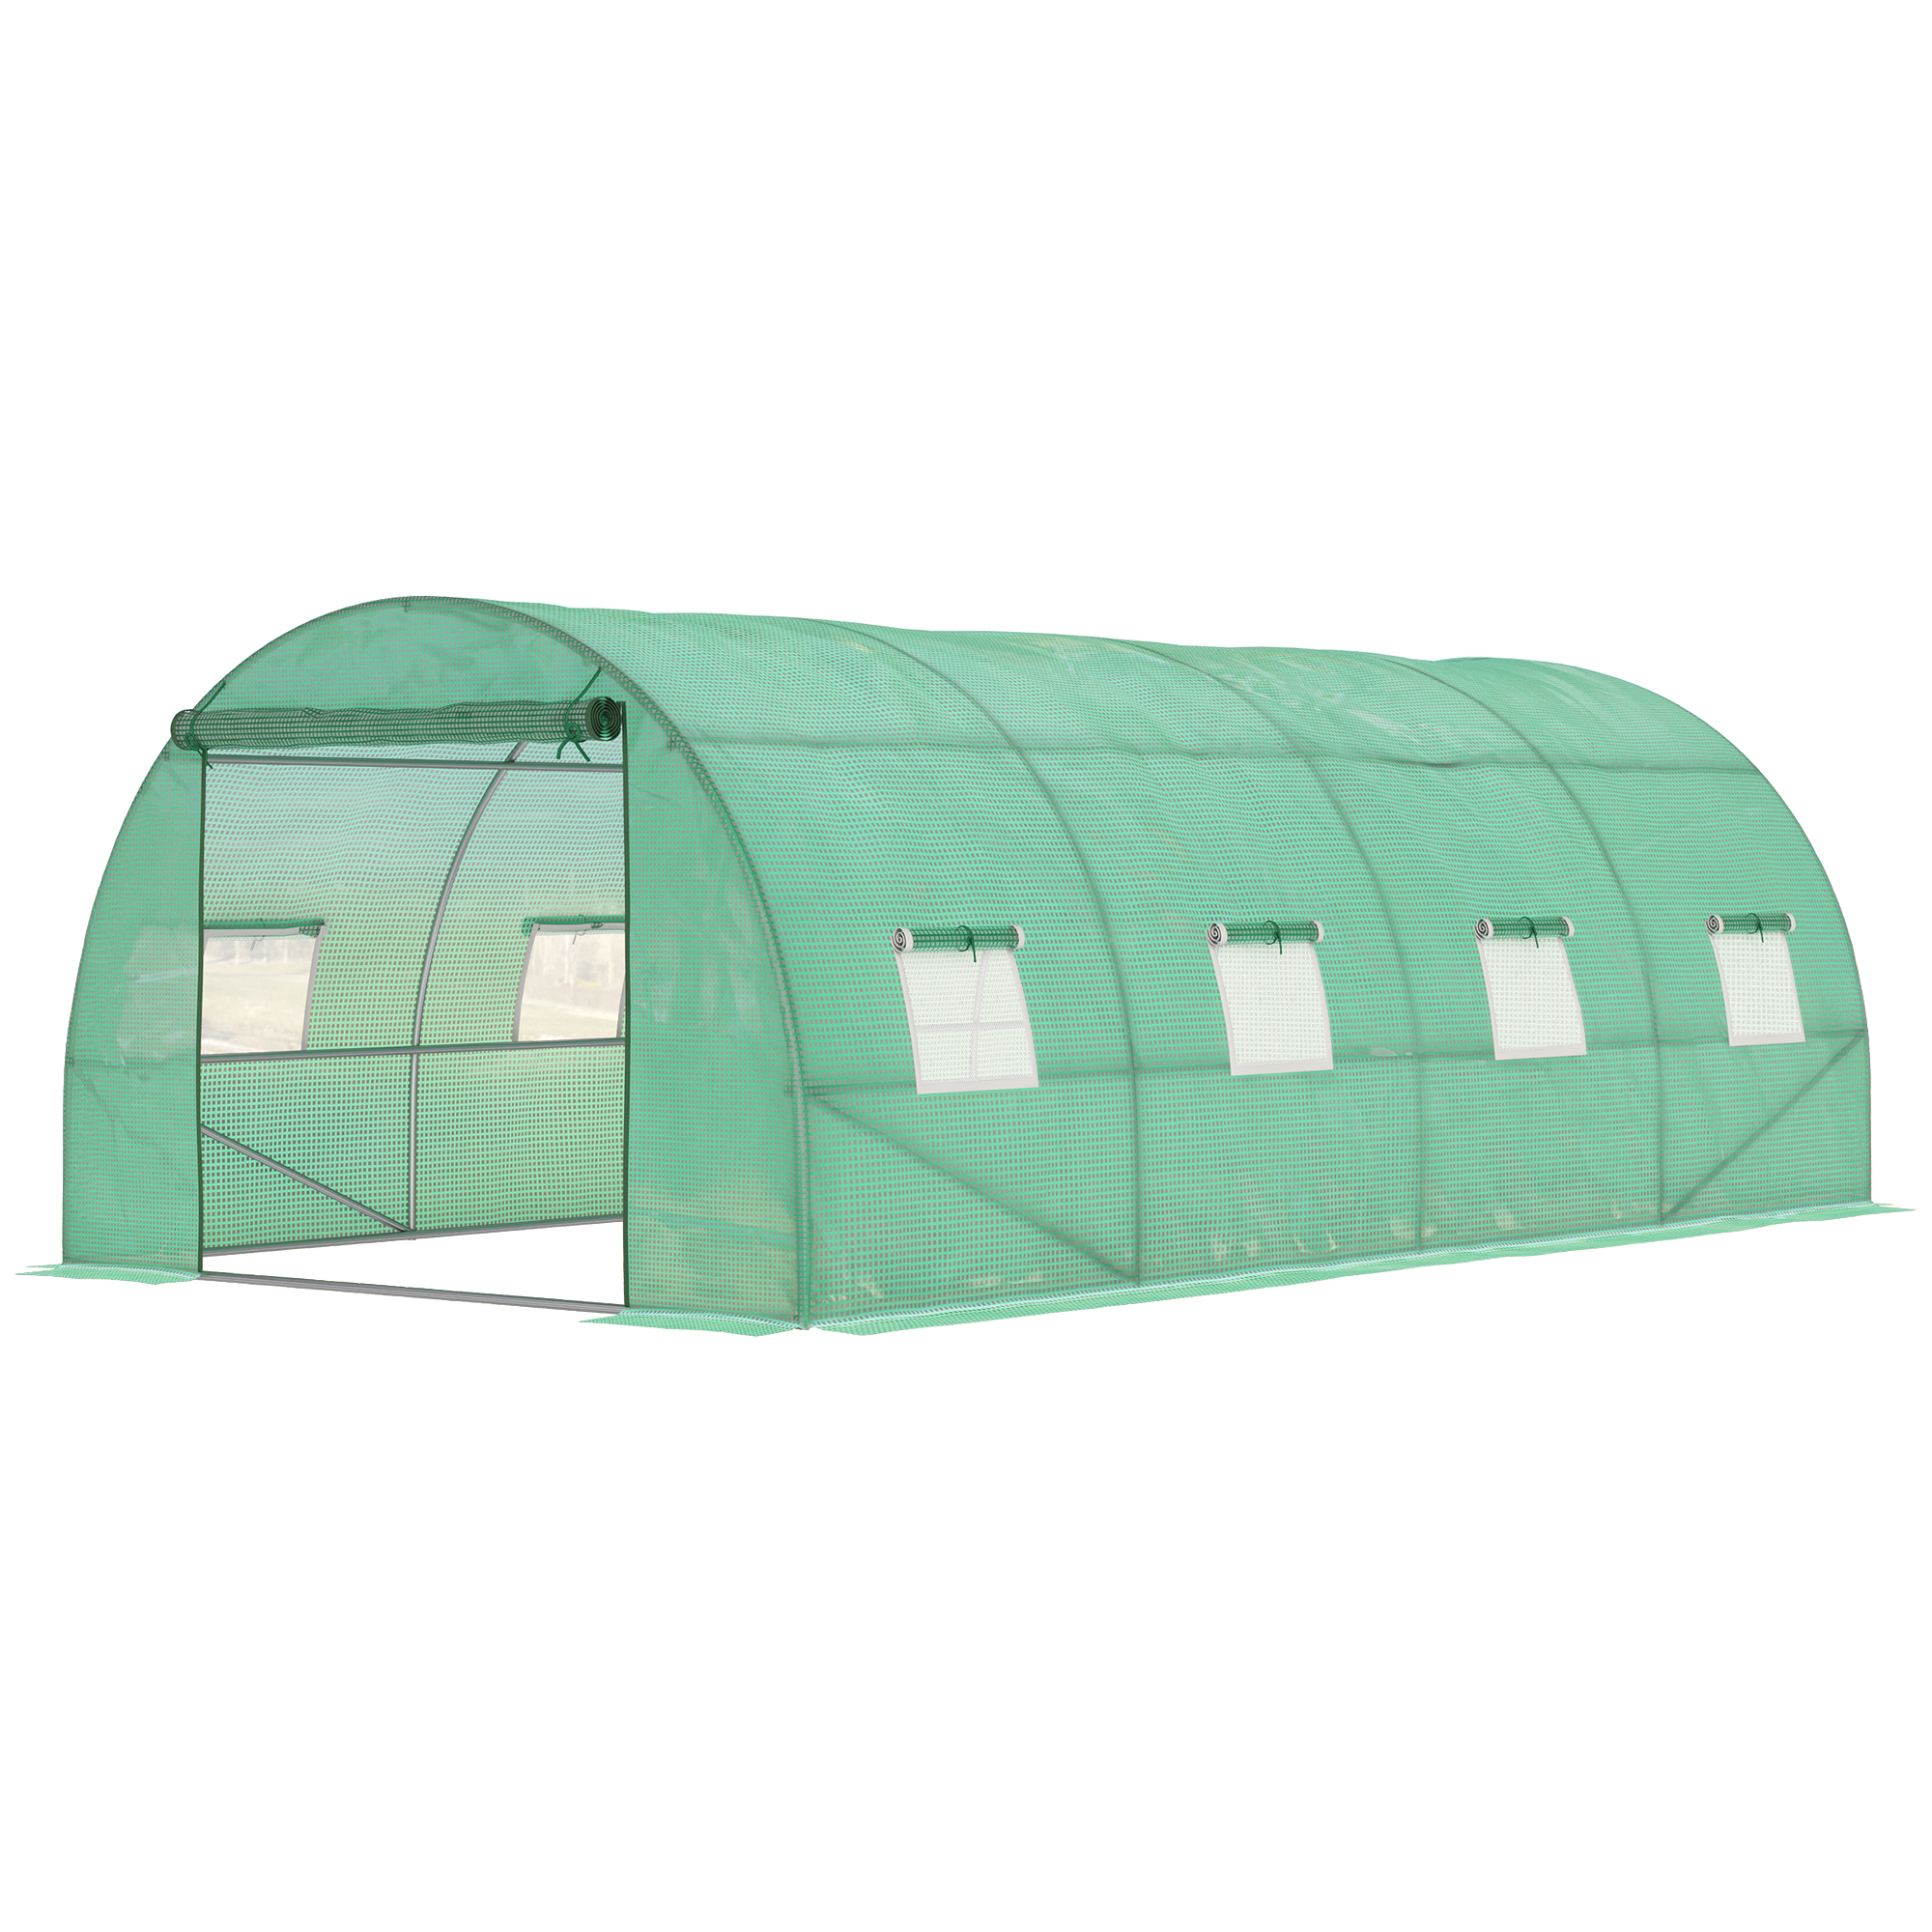 Outsunny 6 X 3 M Large Walk-in Greenhouse Garden Polytunnel Greenhouse With Steel Frame, Zippered Door And Roll Up Windows, Green